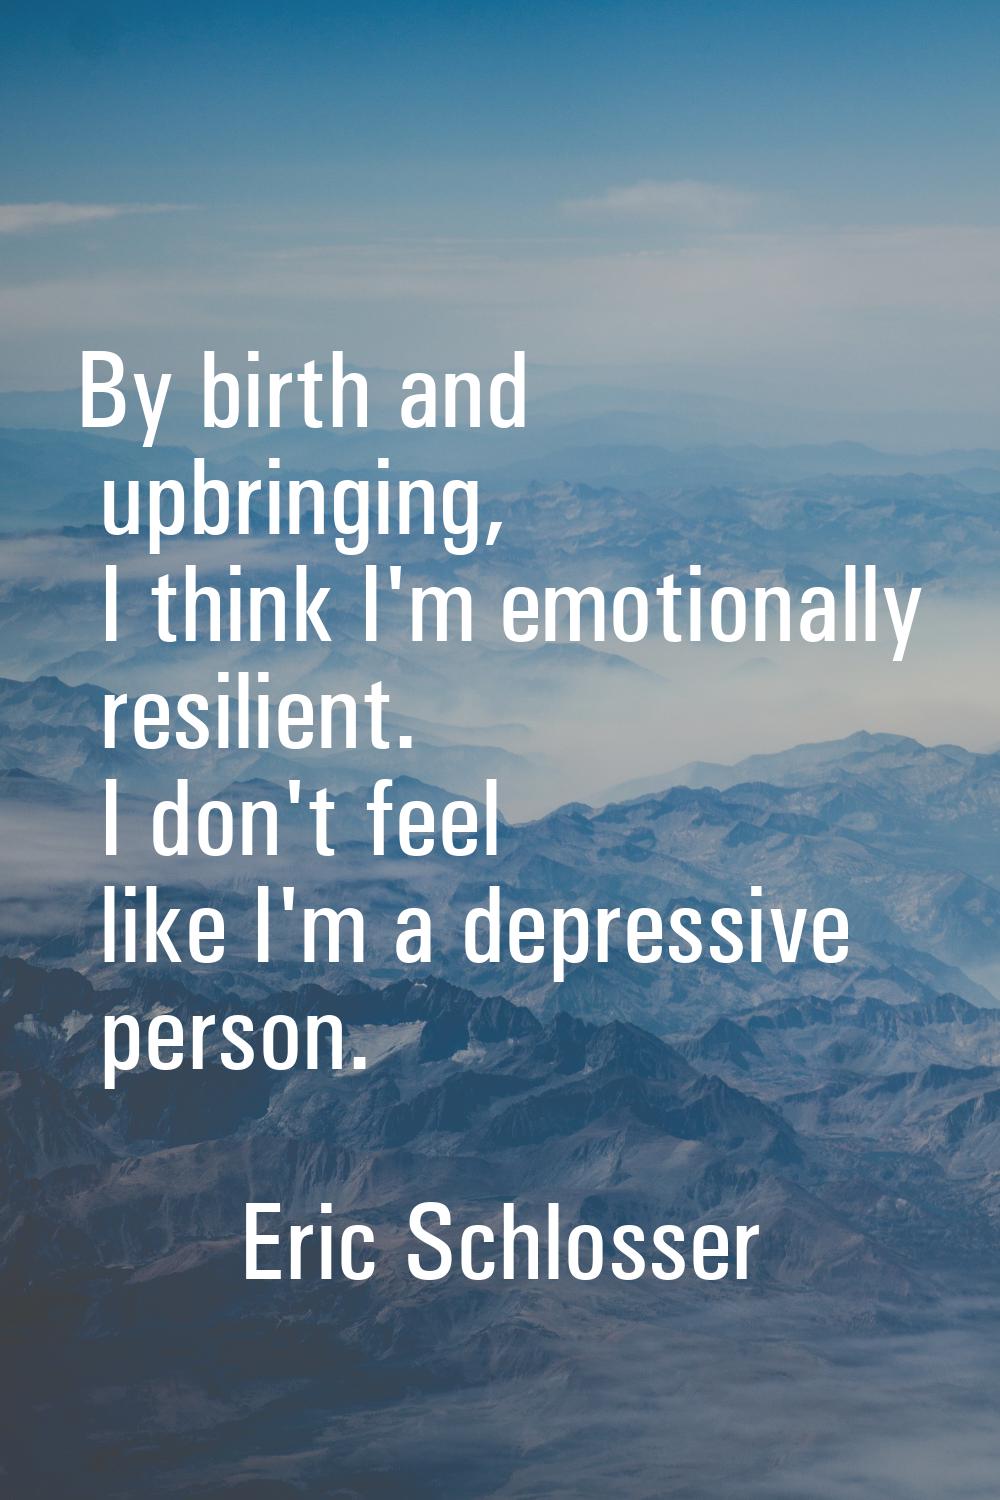 By birth and upbringing, I think I'm emotionally resilient. I don't feel like I'm a depressive pers